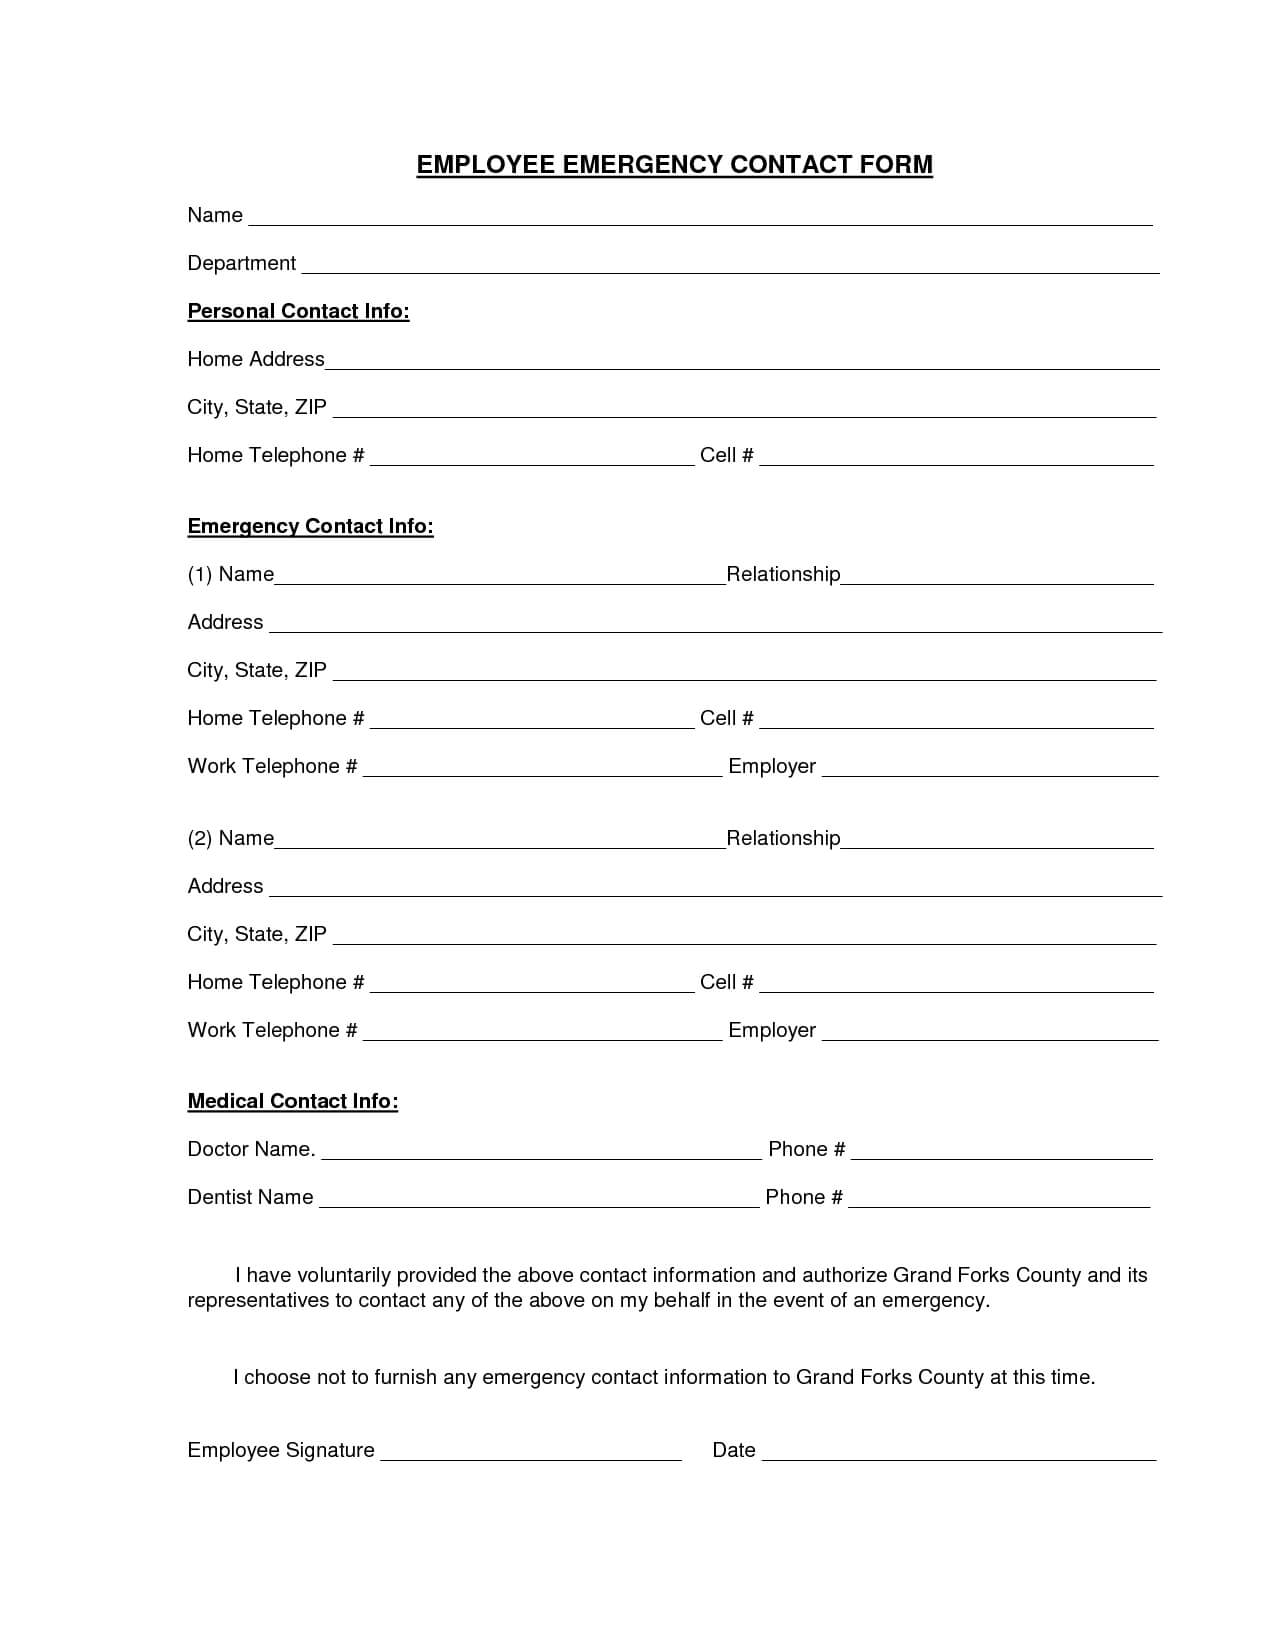 Download A Free Emergency Contact Form And Emergency Card For In Case Of Emergency Card Template